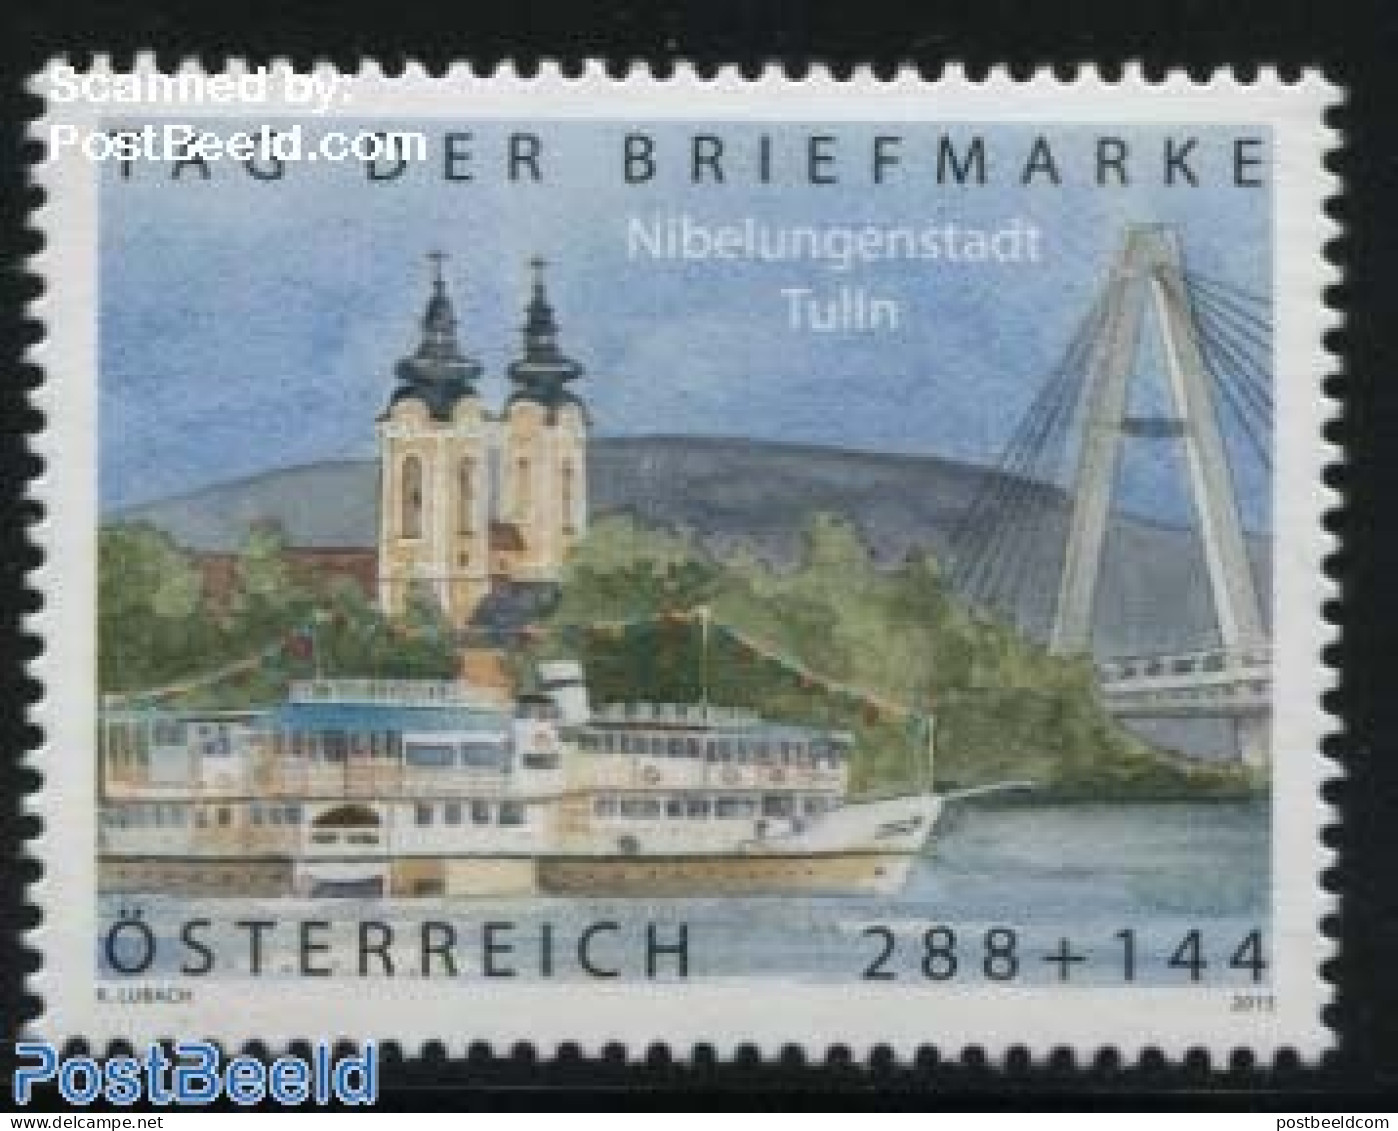 Austria 2015 Stamp Day 1v, Mint NH, Religion - Transport - Churches, Temples, Mosques, Synagogues - Stamp Day - Ships .. - Unused Stamps